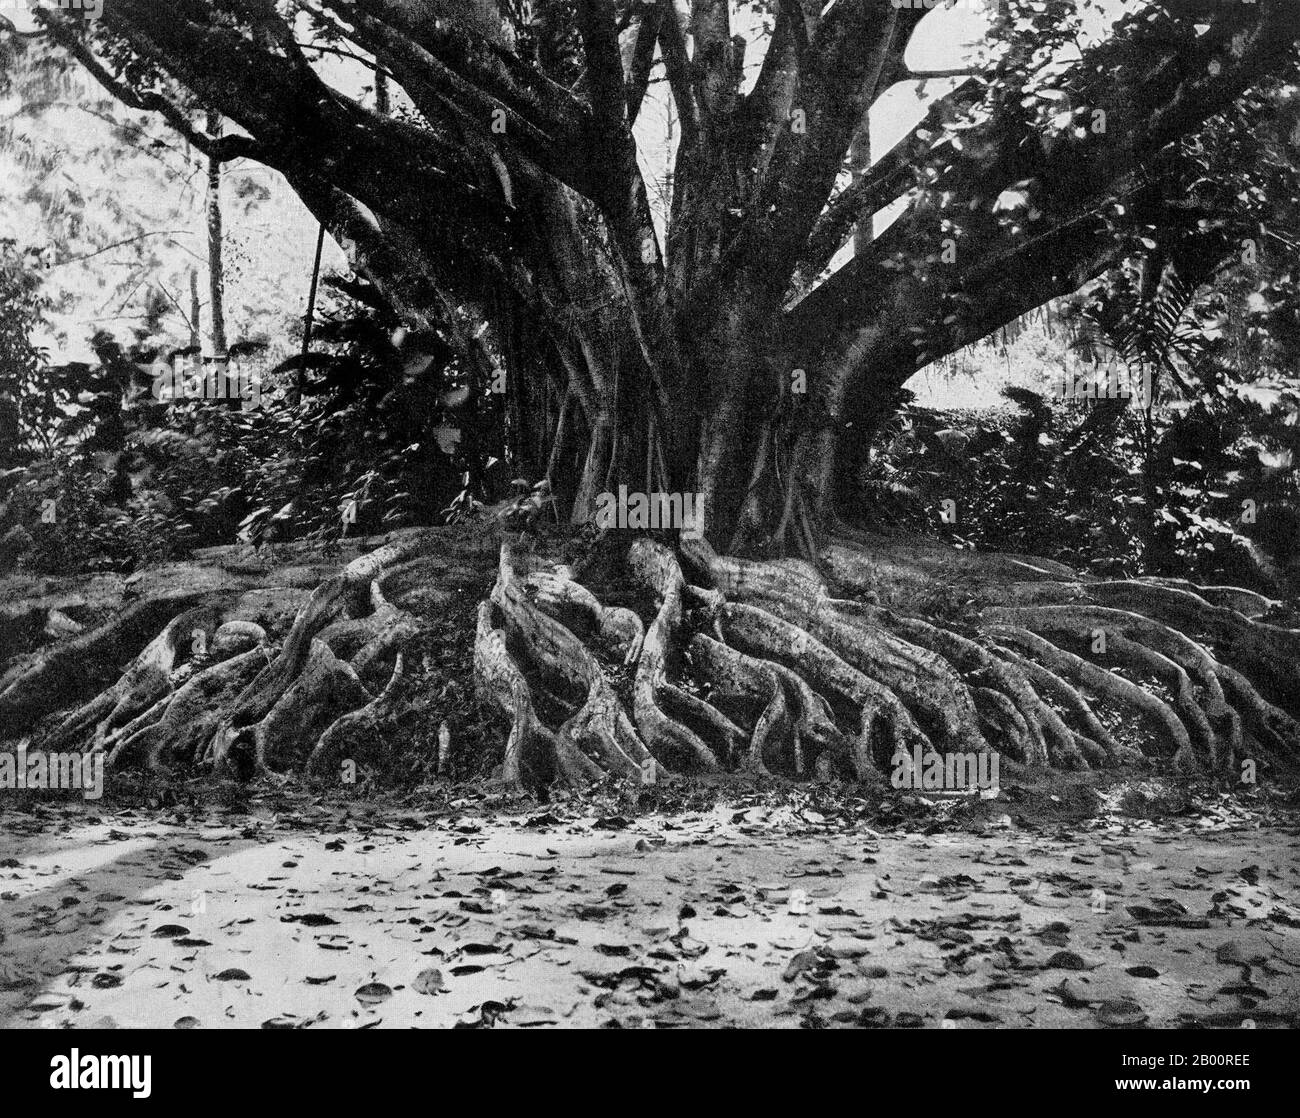 Sri Lanka: A Ficus Elastica tree in Peradeniya, Central Highlands. Photograph by Ernst Haeckel (1834-1919), early 20th century.  Ernst Heinrich Philipp August Haeckel (February 16, 1834 – August 9, 1919), also written von Haeckel, was an eminent German biologist, naturalist, philosopher, physician, professor and artist who discovered, described and named thousands of new species, mapped a genealogical tree relating all life forms, and coined many terms in biology, including anthropogeny, ecology, phylum, phylogeny, and the kingdom Protista. Stock Photo